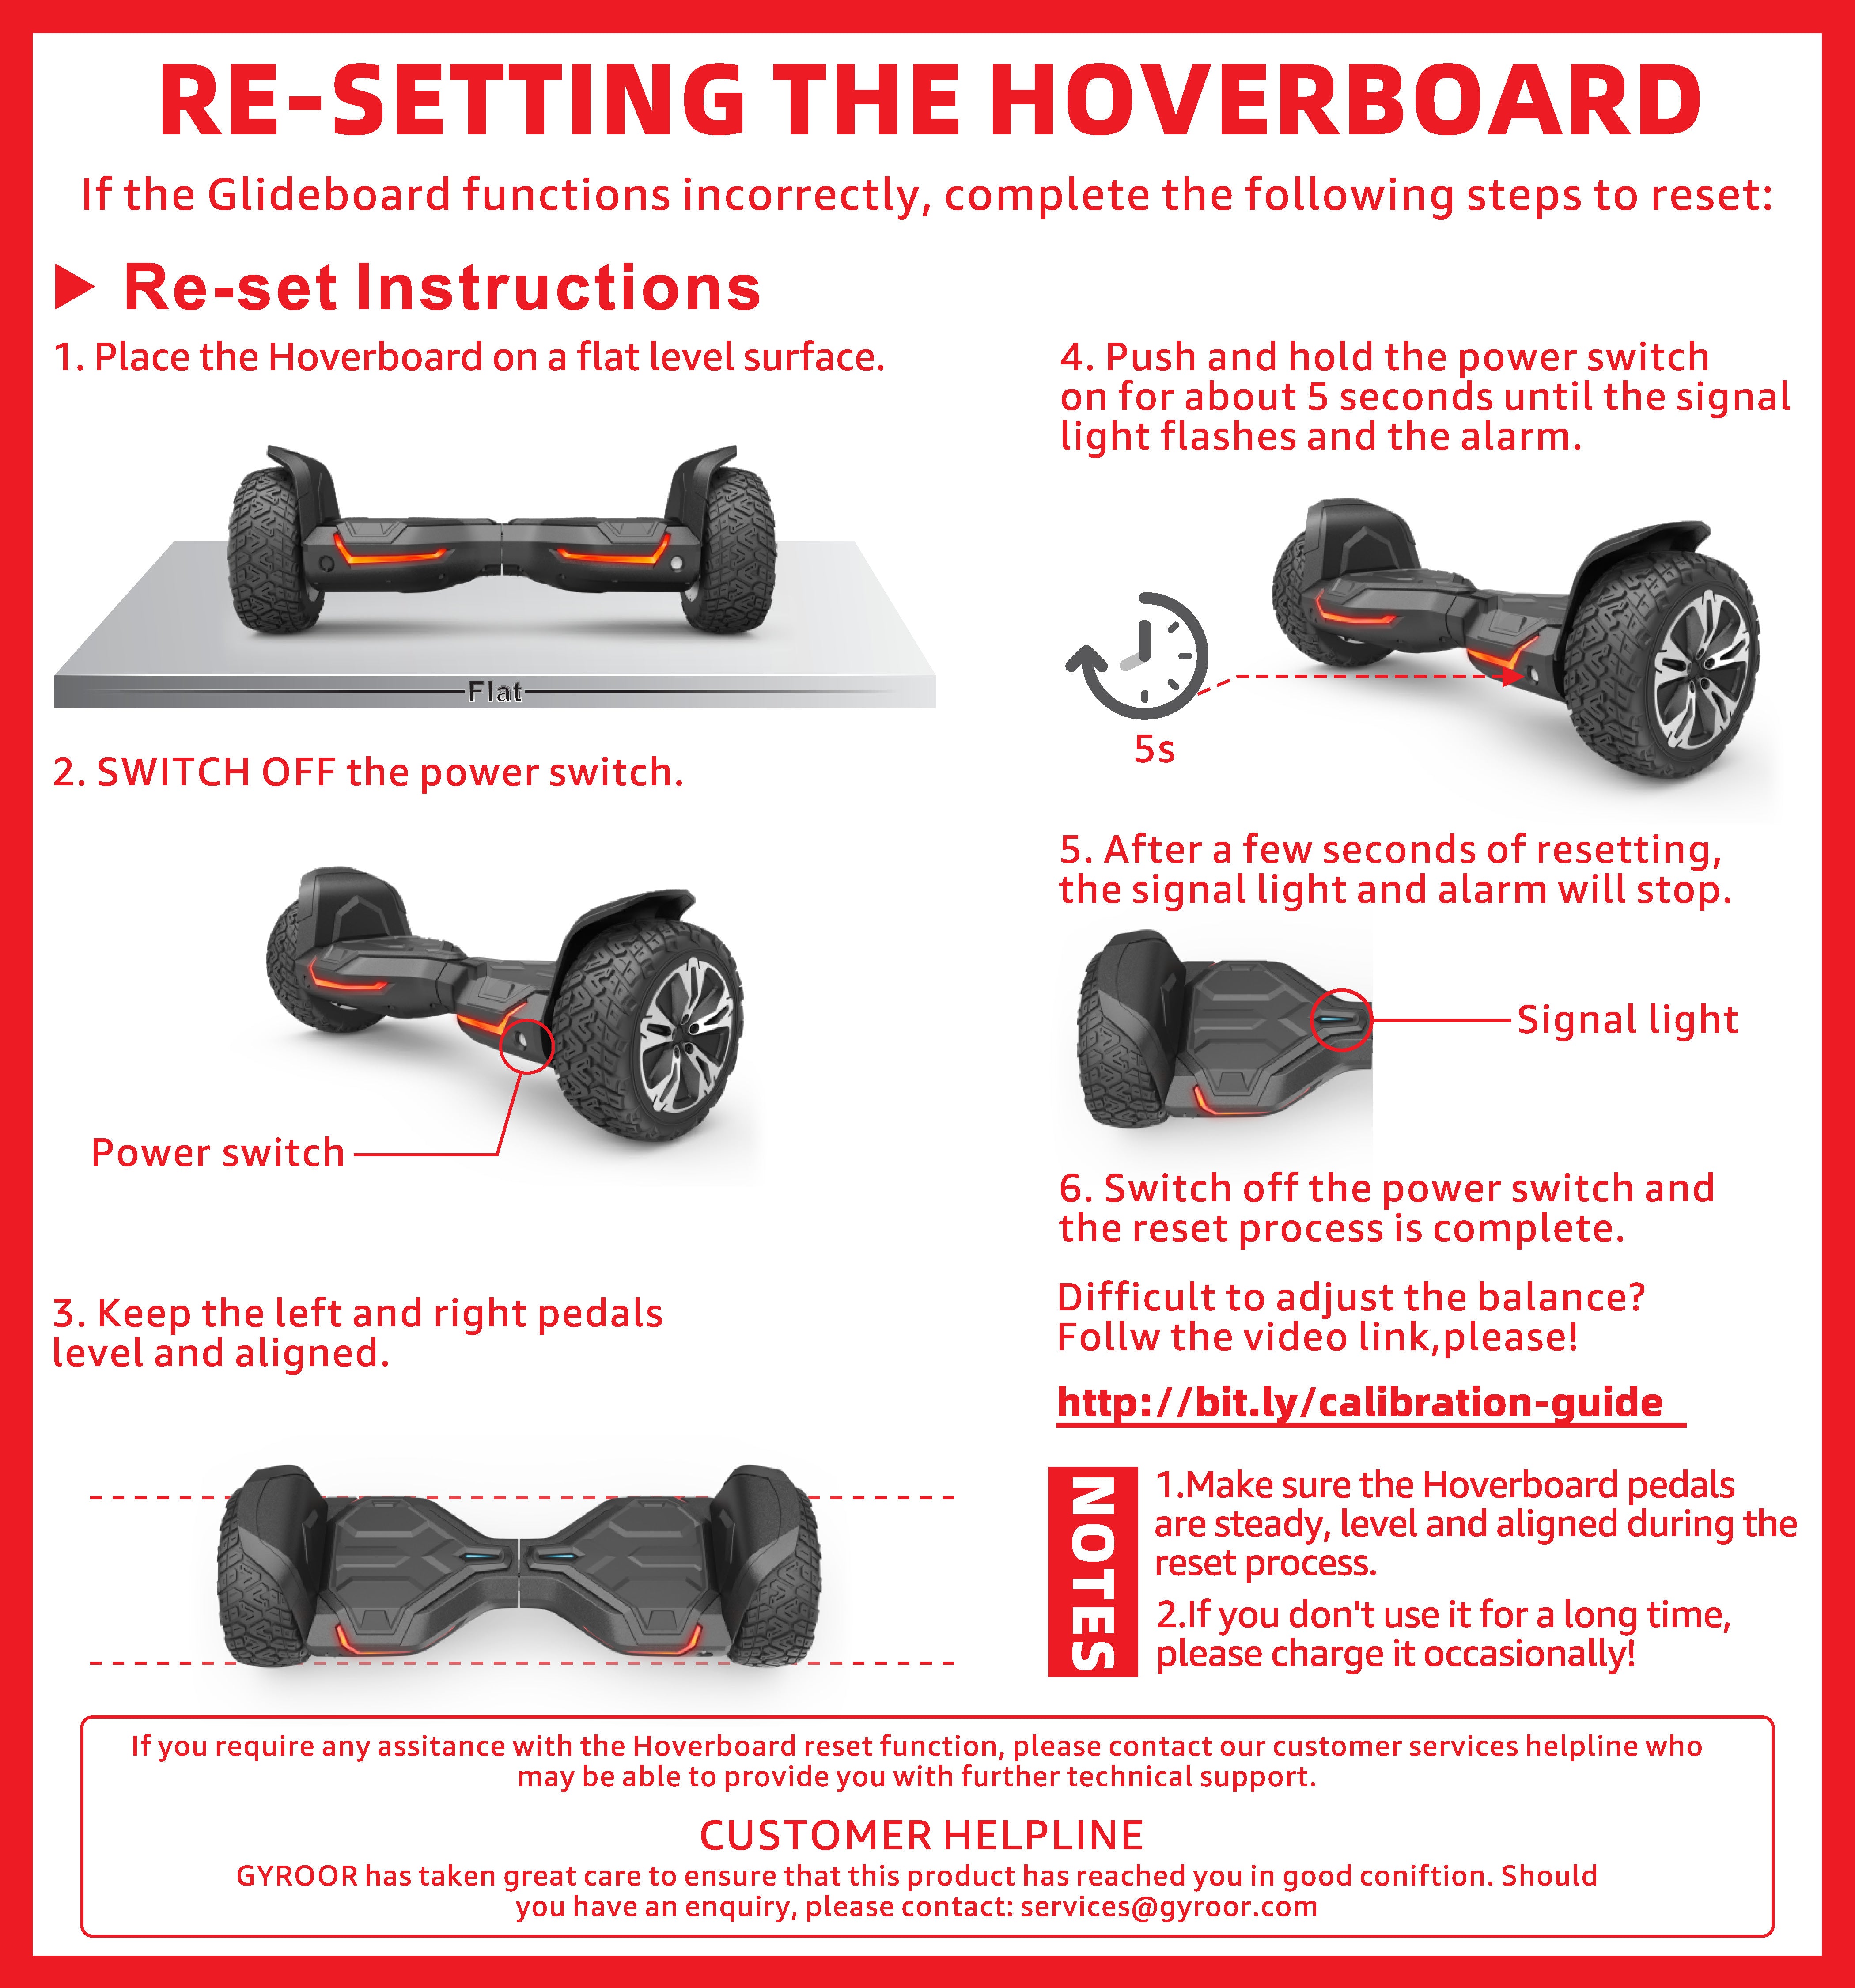 FAQ for gyroor hoverboard fix hoverboard -